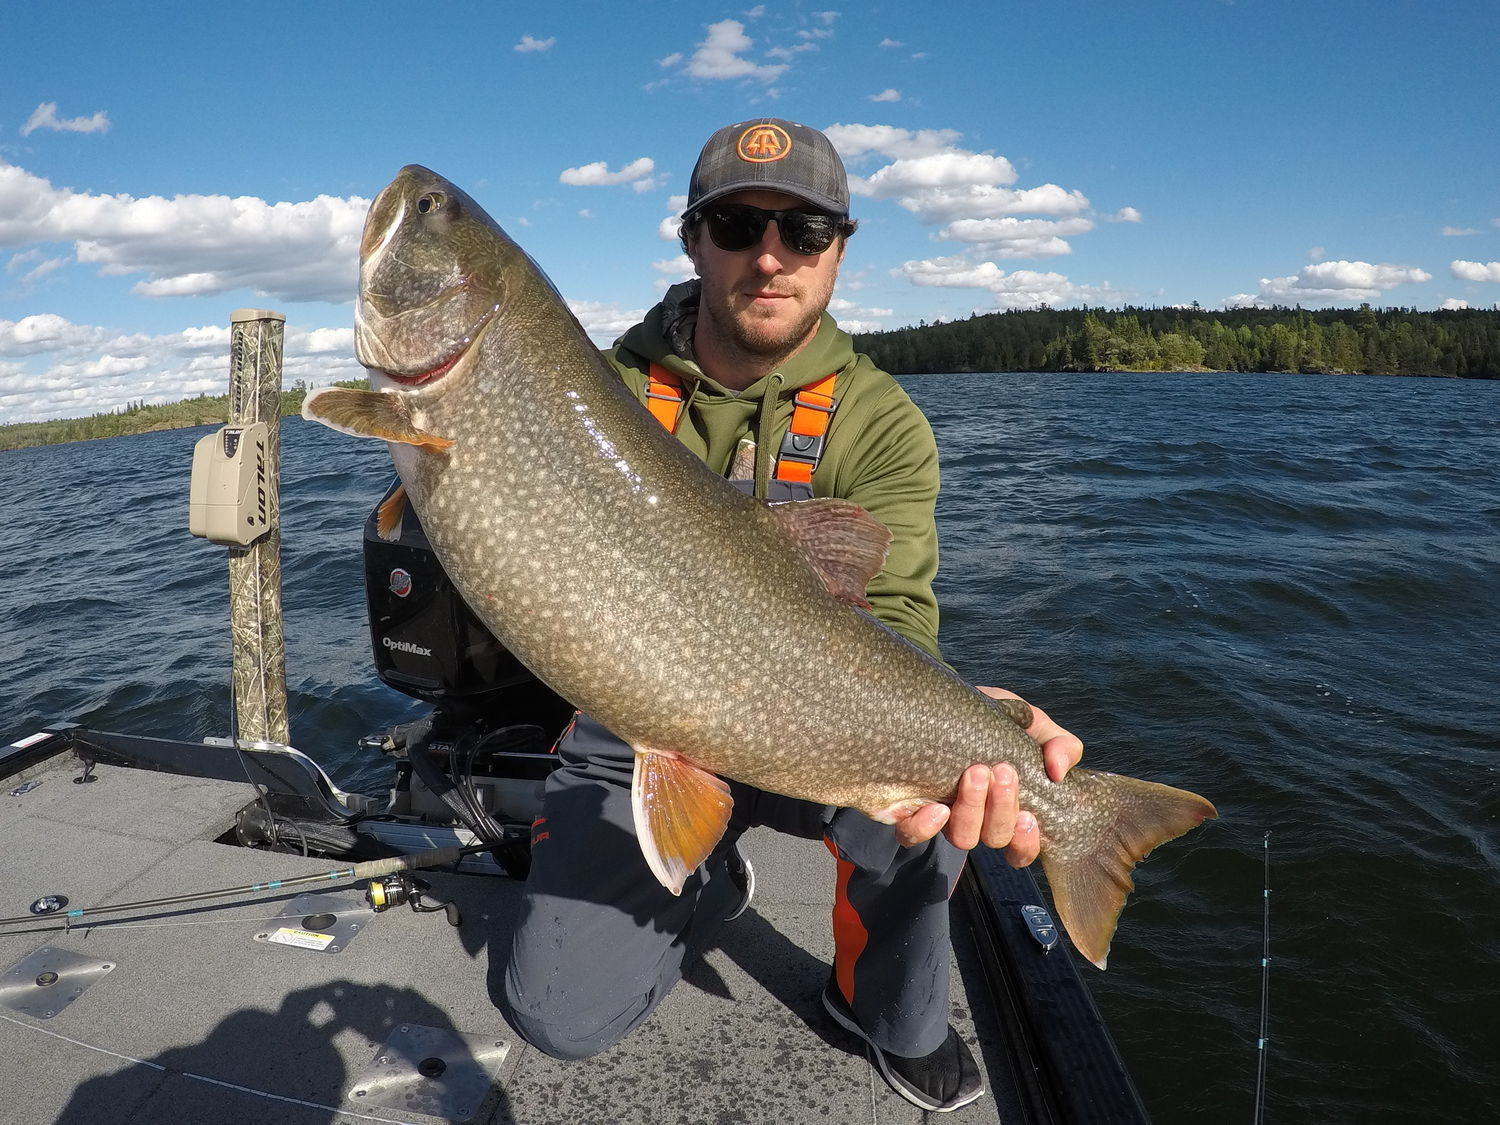 Jigging for Trout - The Fishing Website